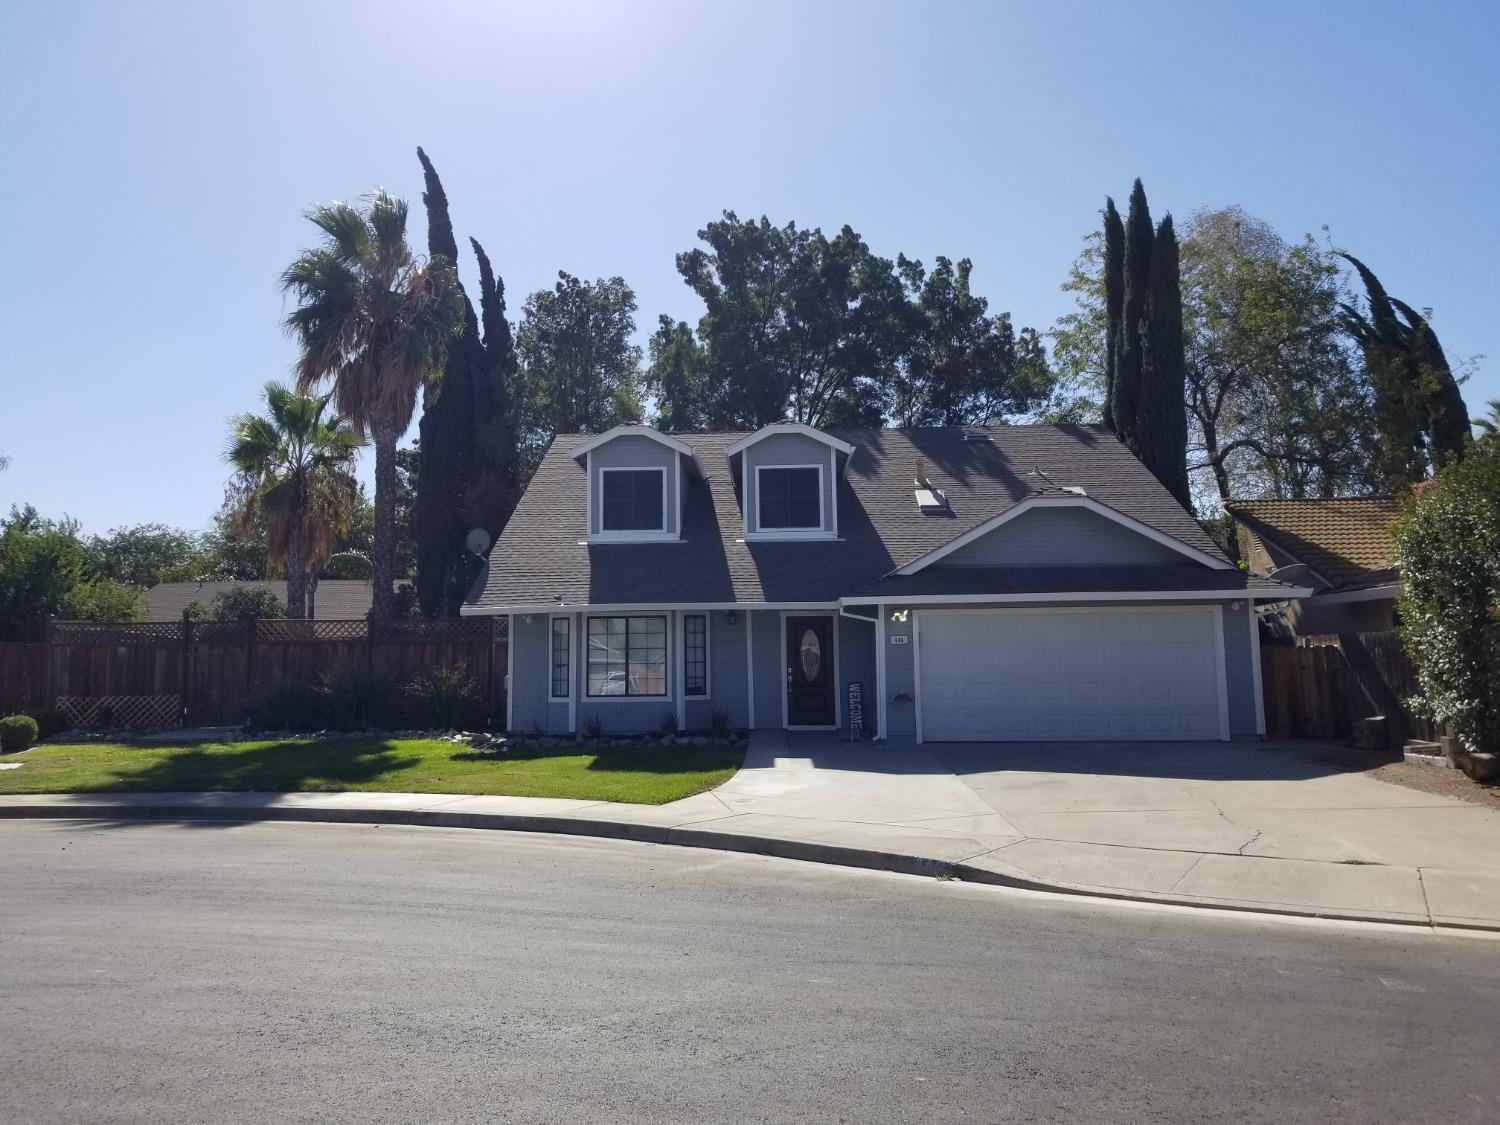 446 D Arpino Court, Patterson, CA 95363